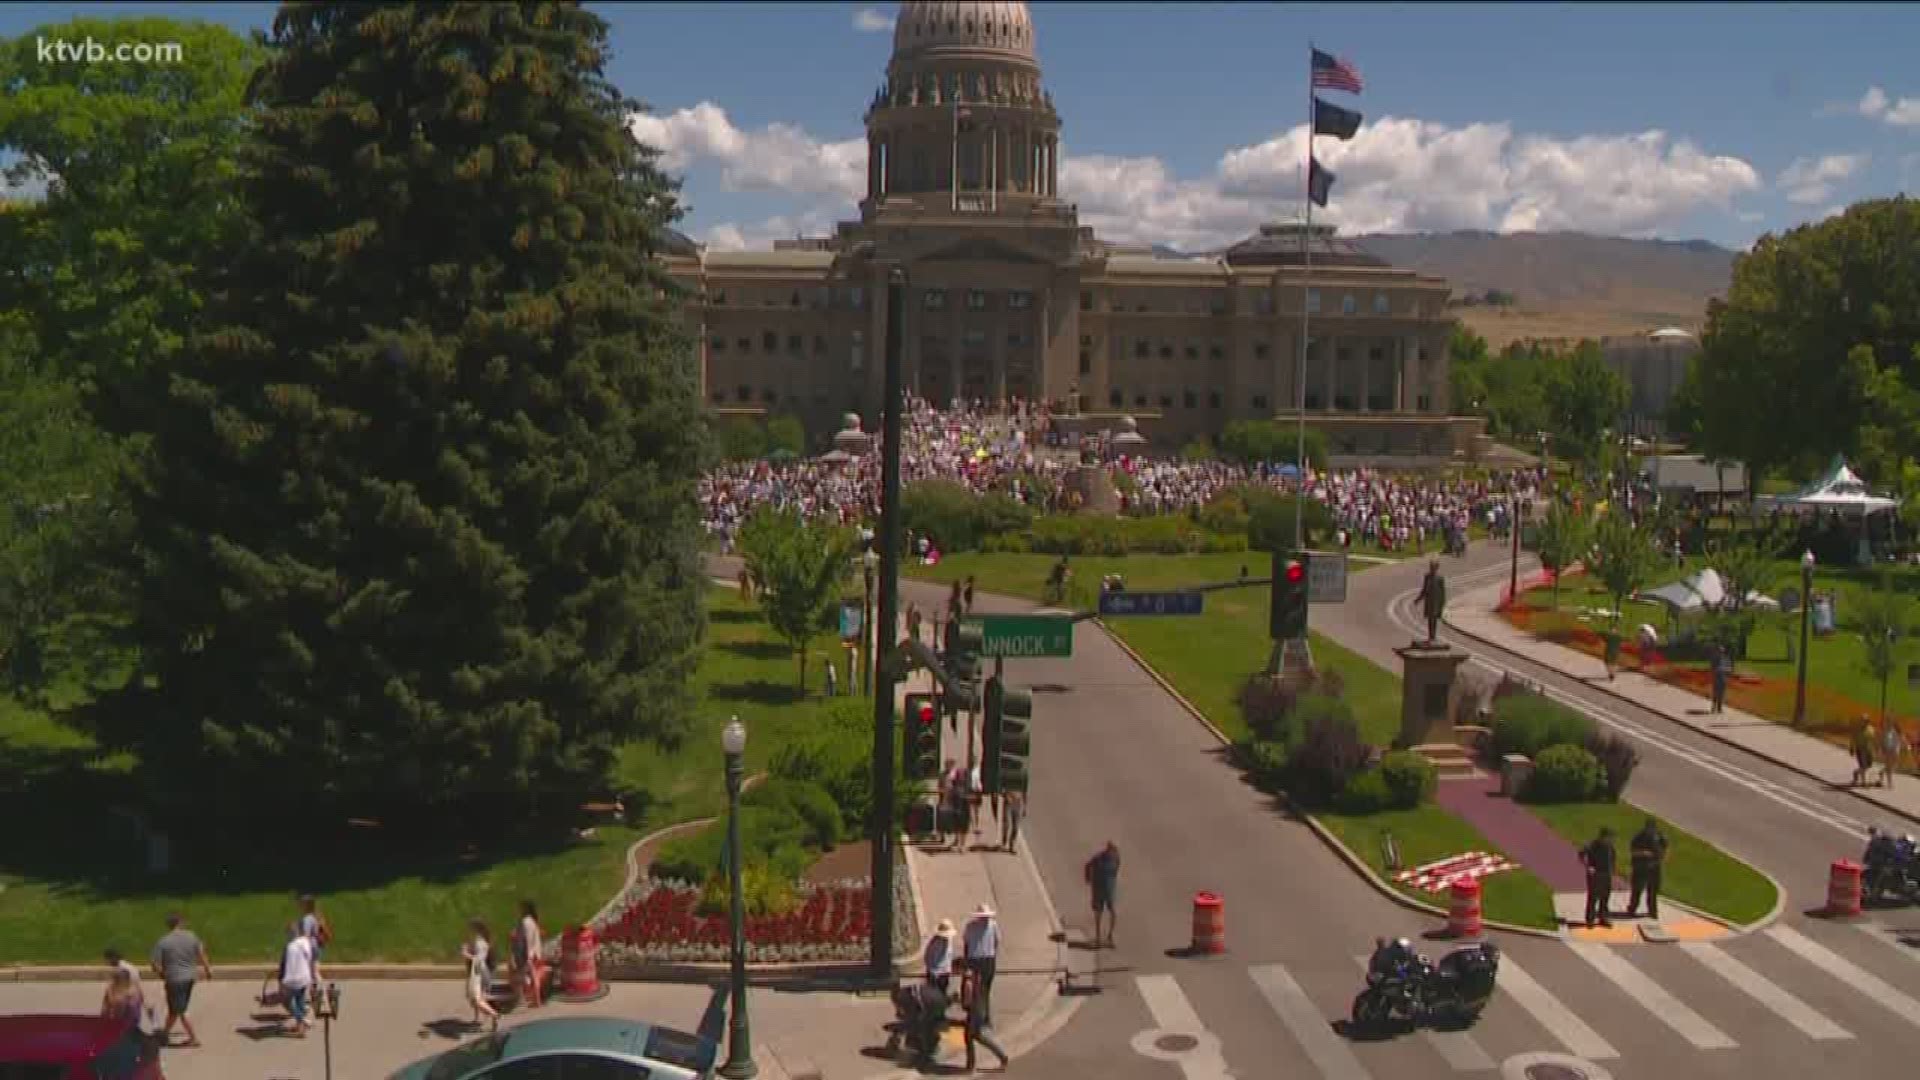 Thousands rallied at the Idaho Statehouse Saturday.